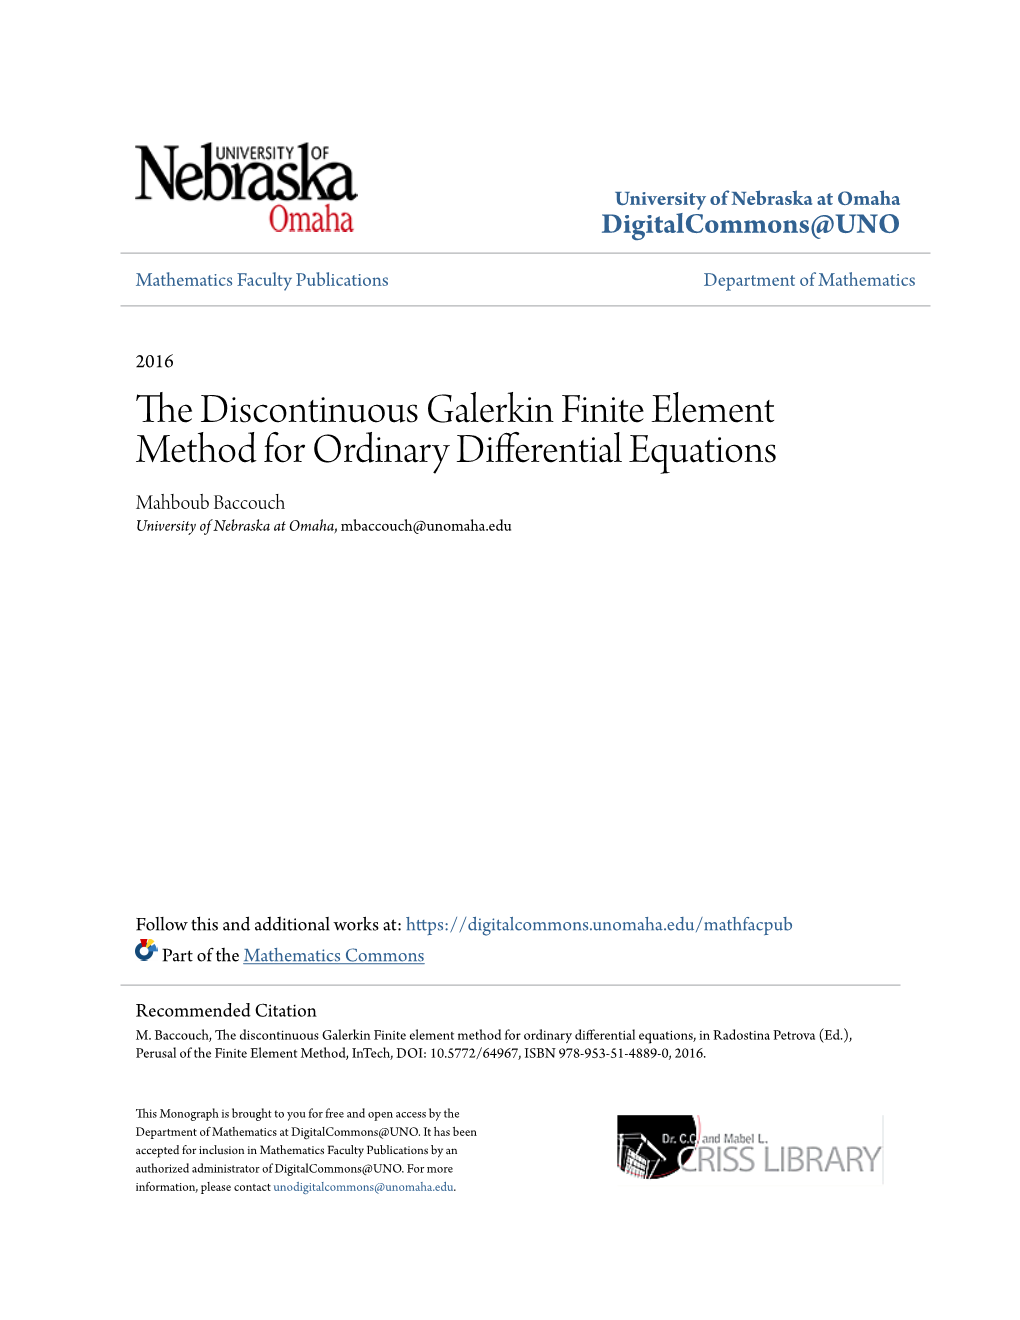 The Discontinuous Galerkin Finite Element Method for Ordinary Differential Equations Mahboub Baccouch University of Nebraska at Omaha, Mbaccouch@Unomaha.Edu